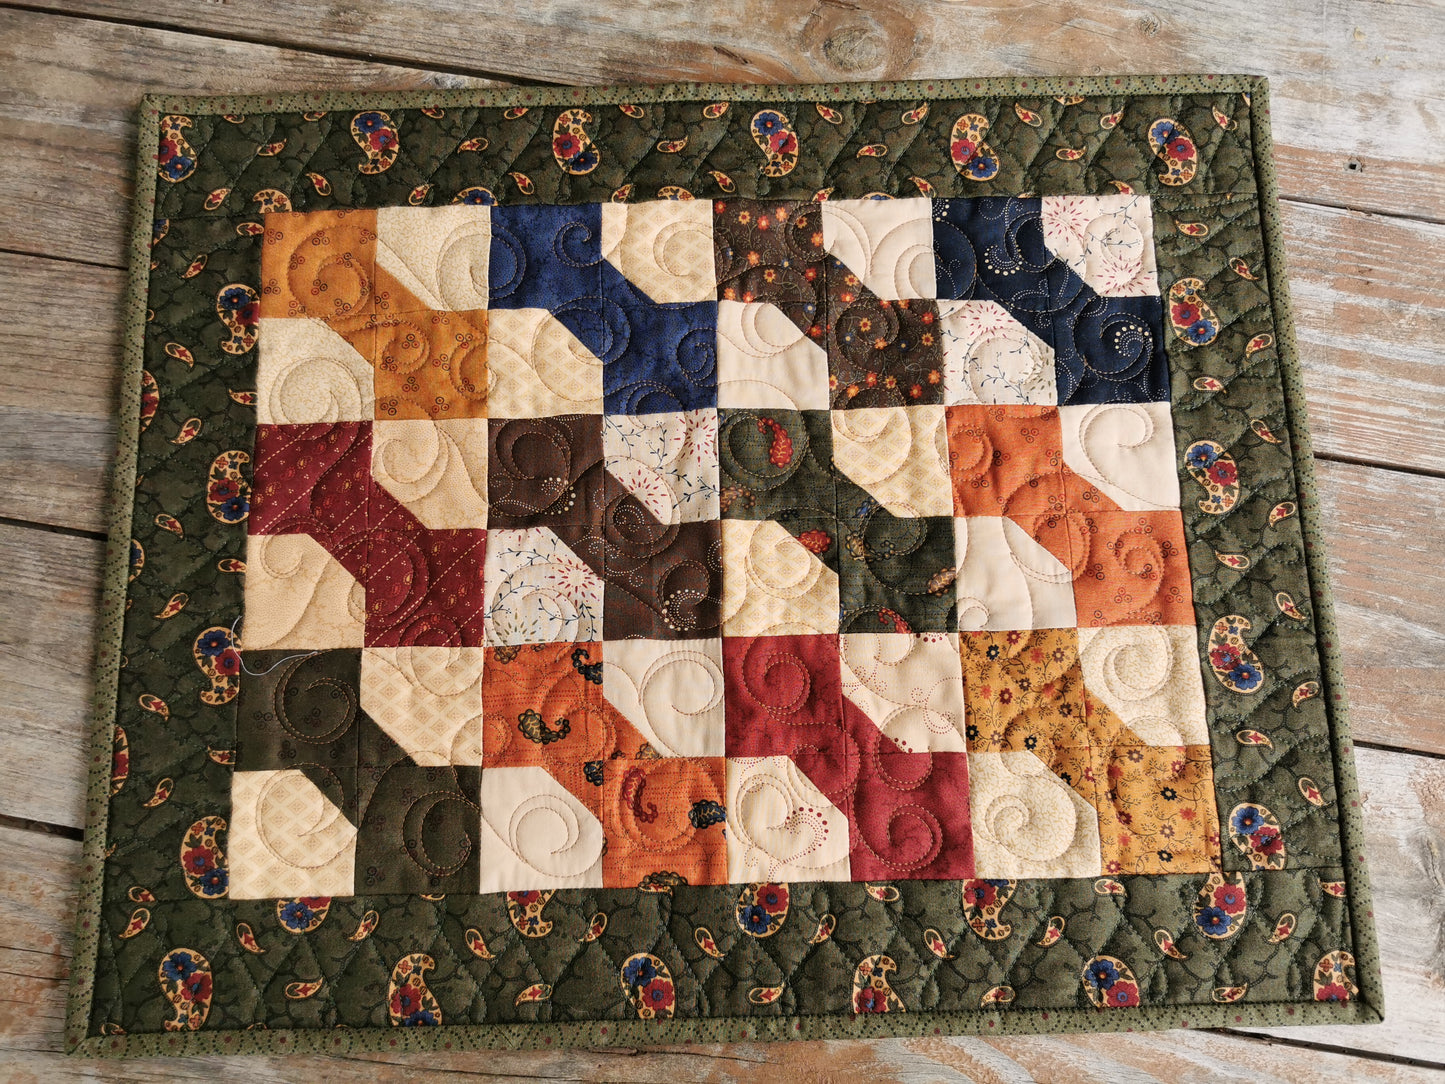 The quilted table runner with bowtie patchwork is shown from overhead.  Each bowtie is a different colour creating a lovely scrap quilt. The rich dark colors and country floral fabrics make this a  lovely, rustic decor piece for fall.